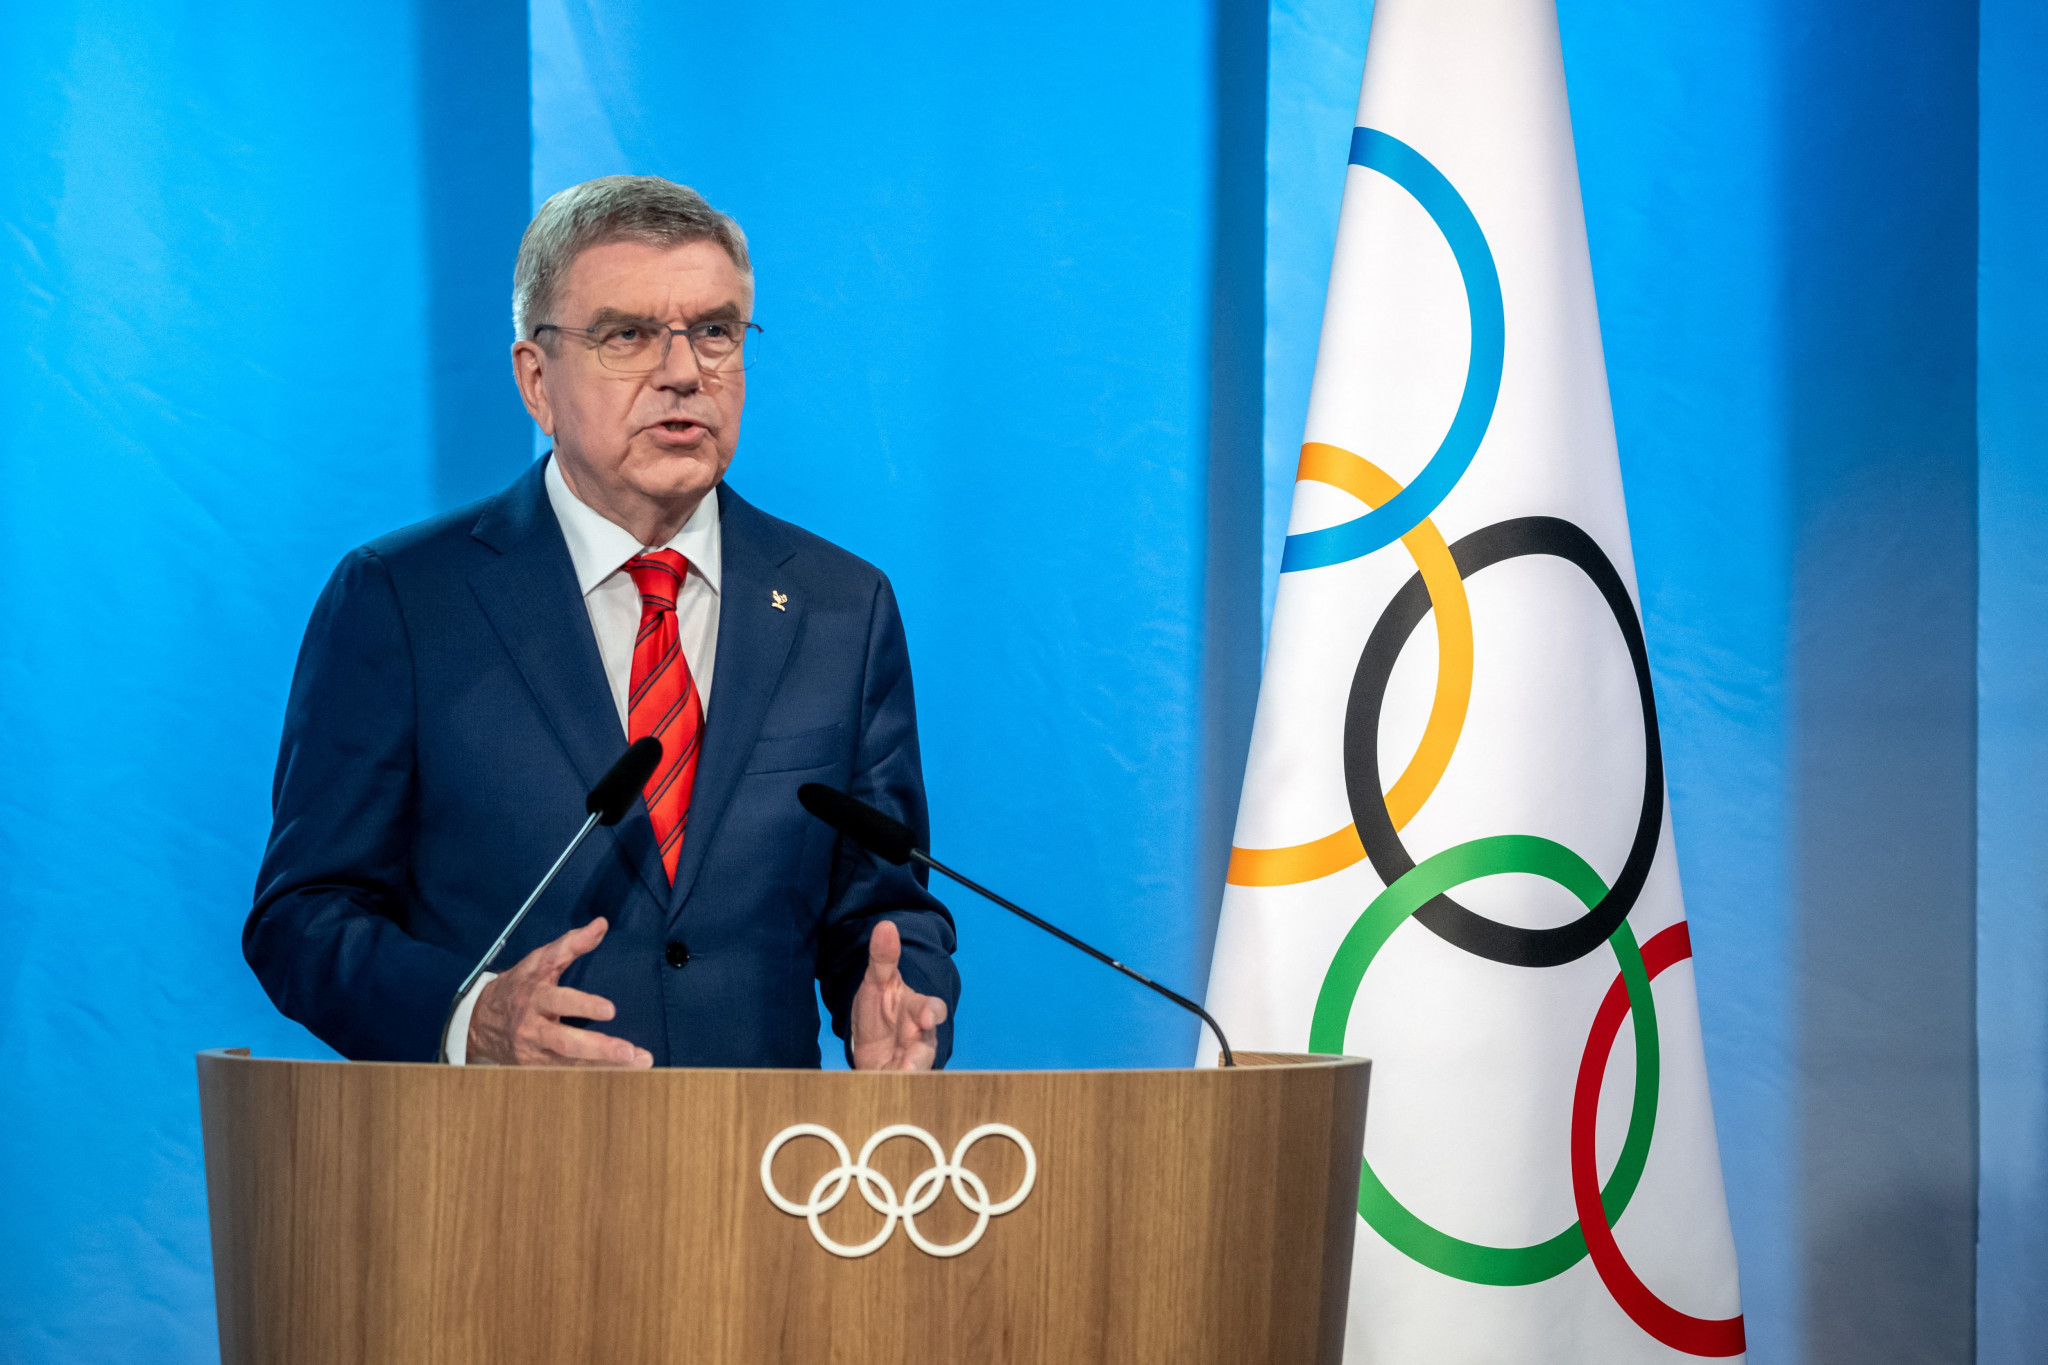 IOC President Thomas Bach told the Session that the organisation had an 